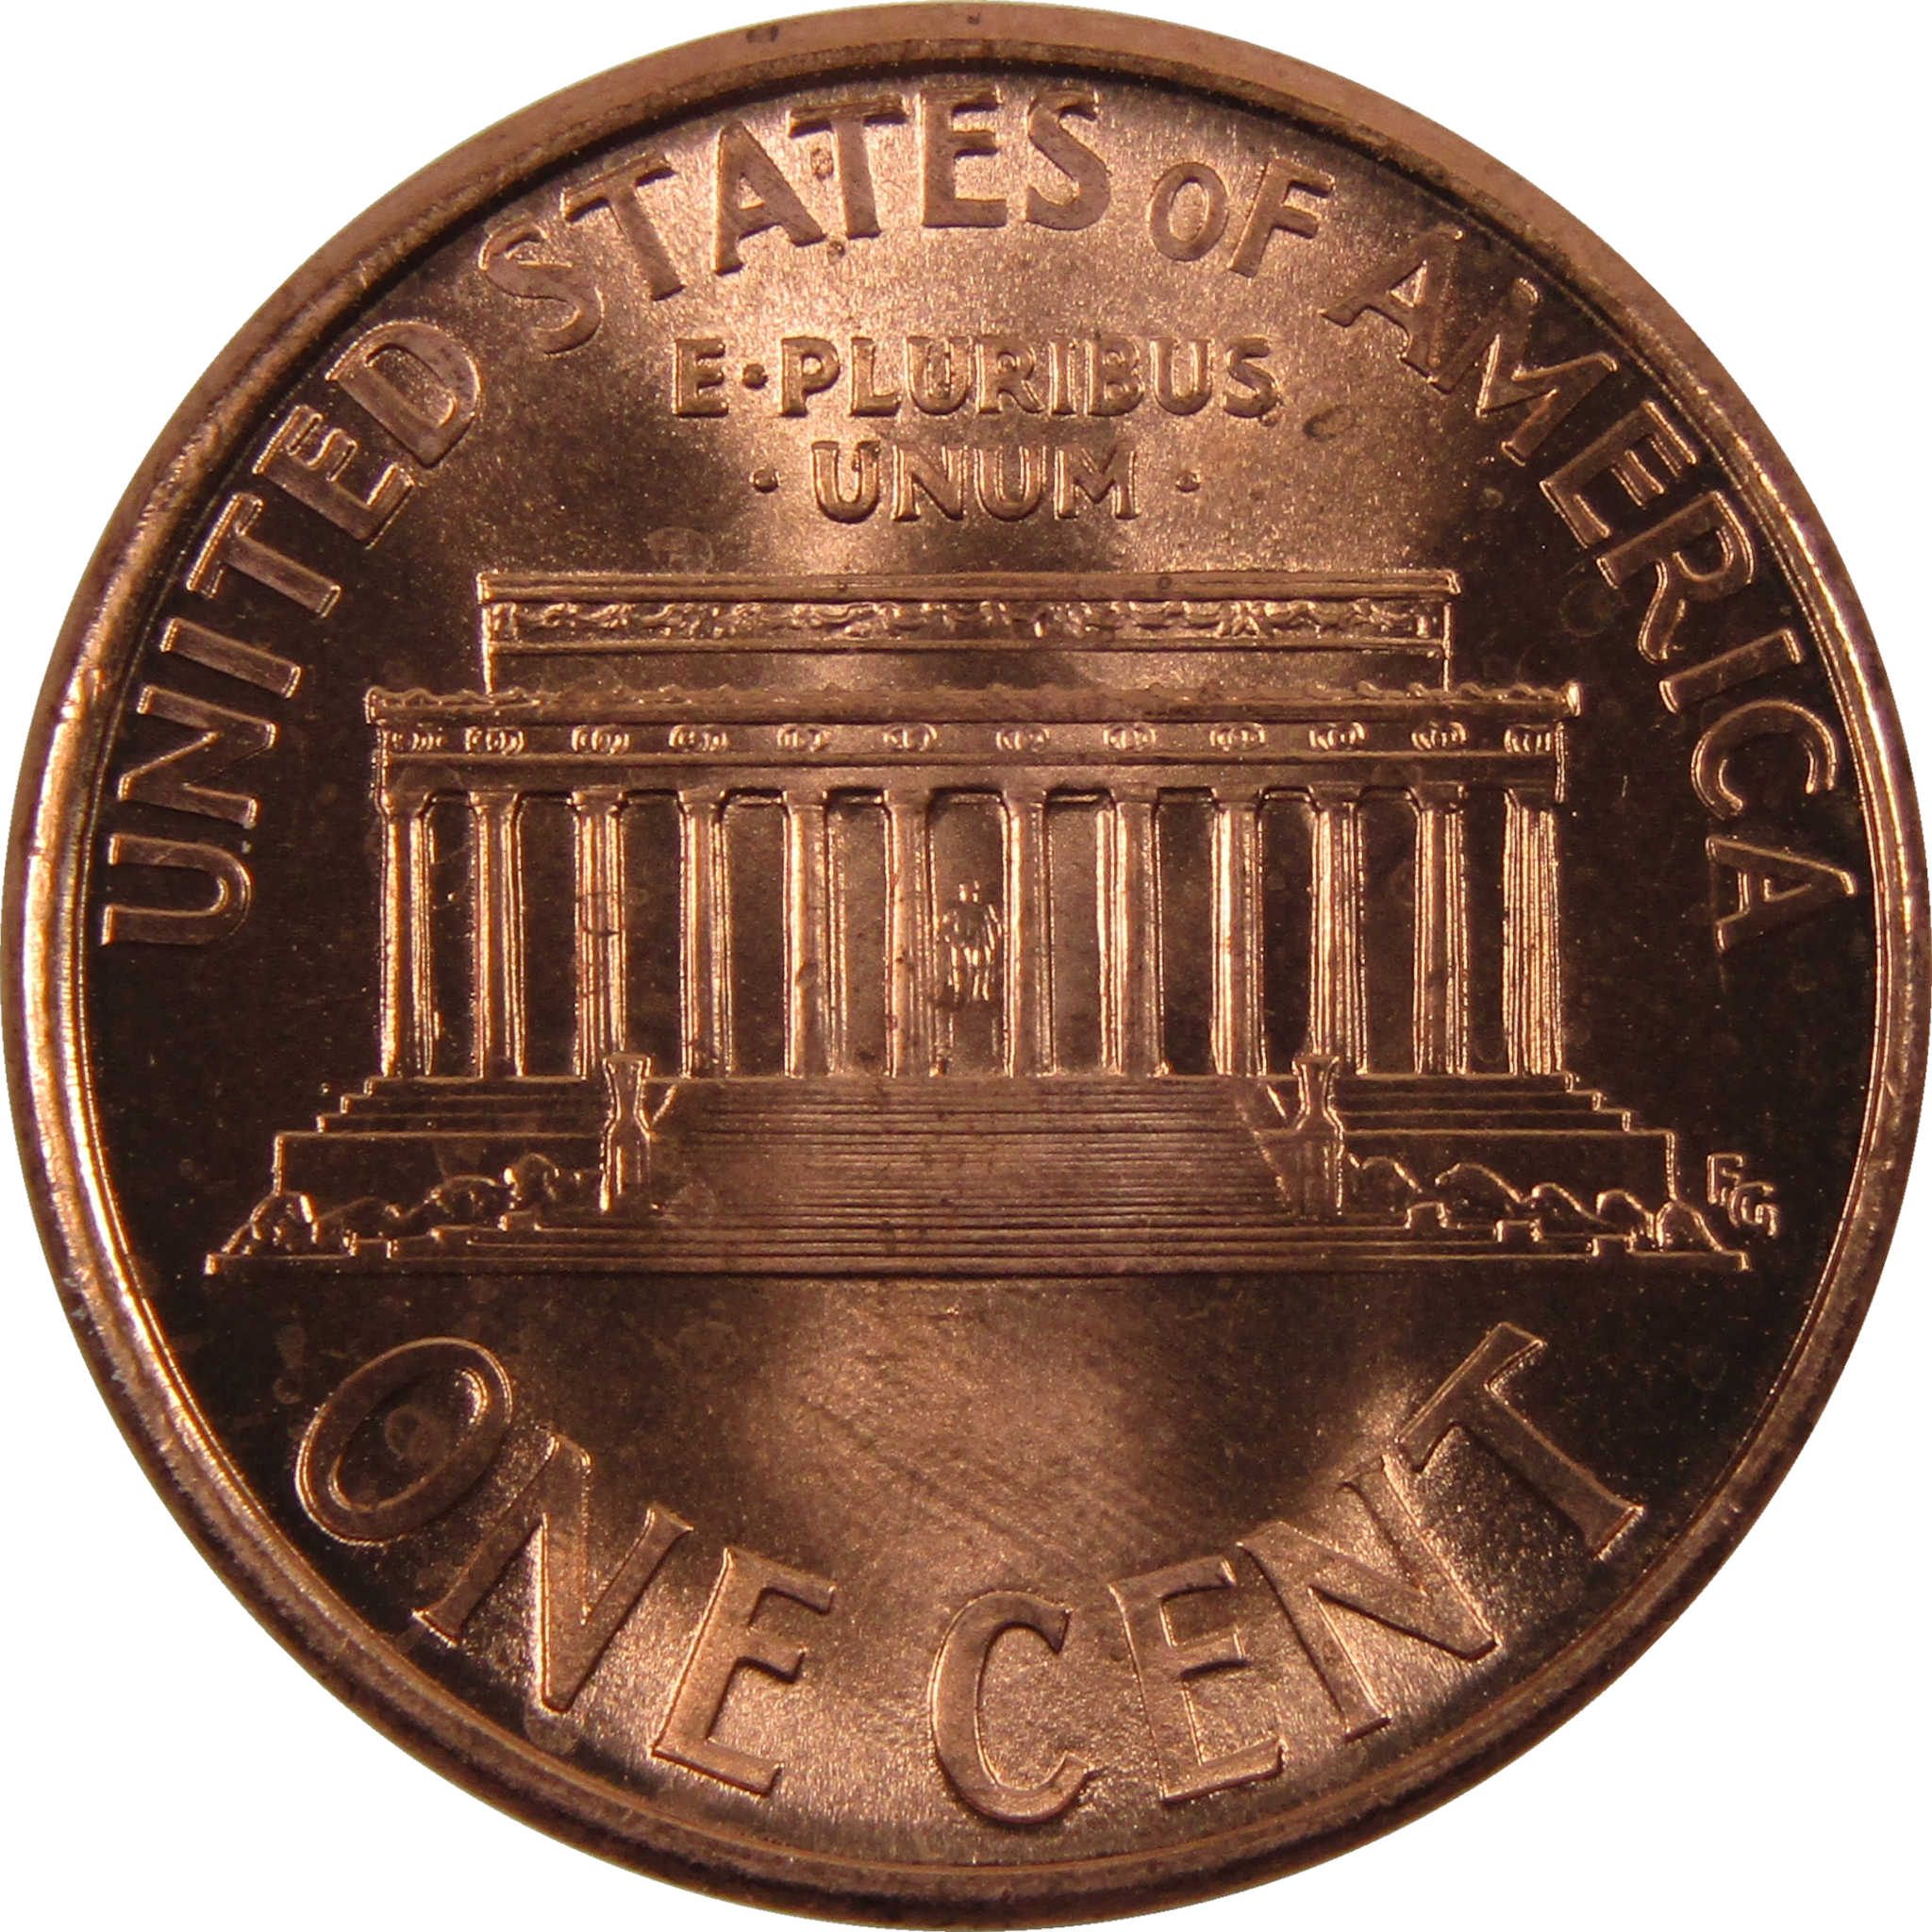 1997 D Lincoln Memorial Cent BU Uncirculated Penny 1c Coin